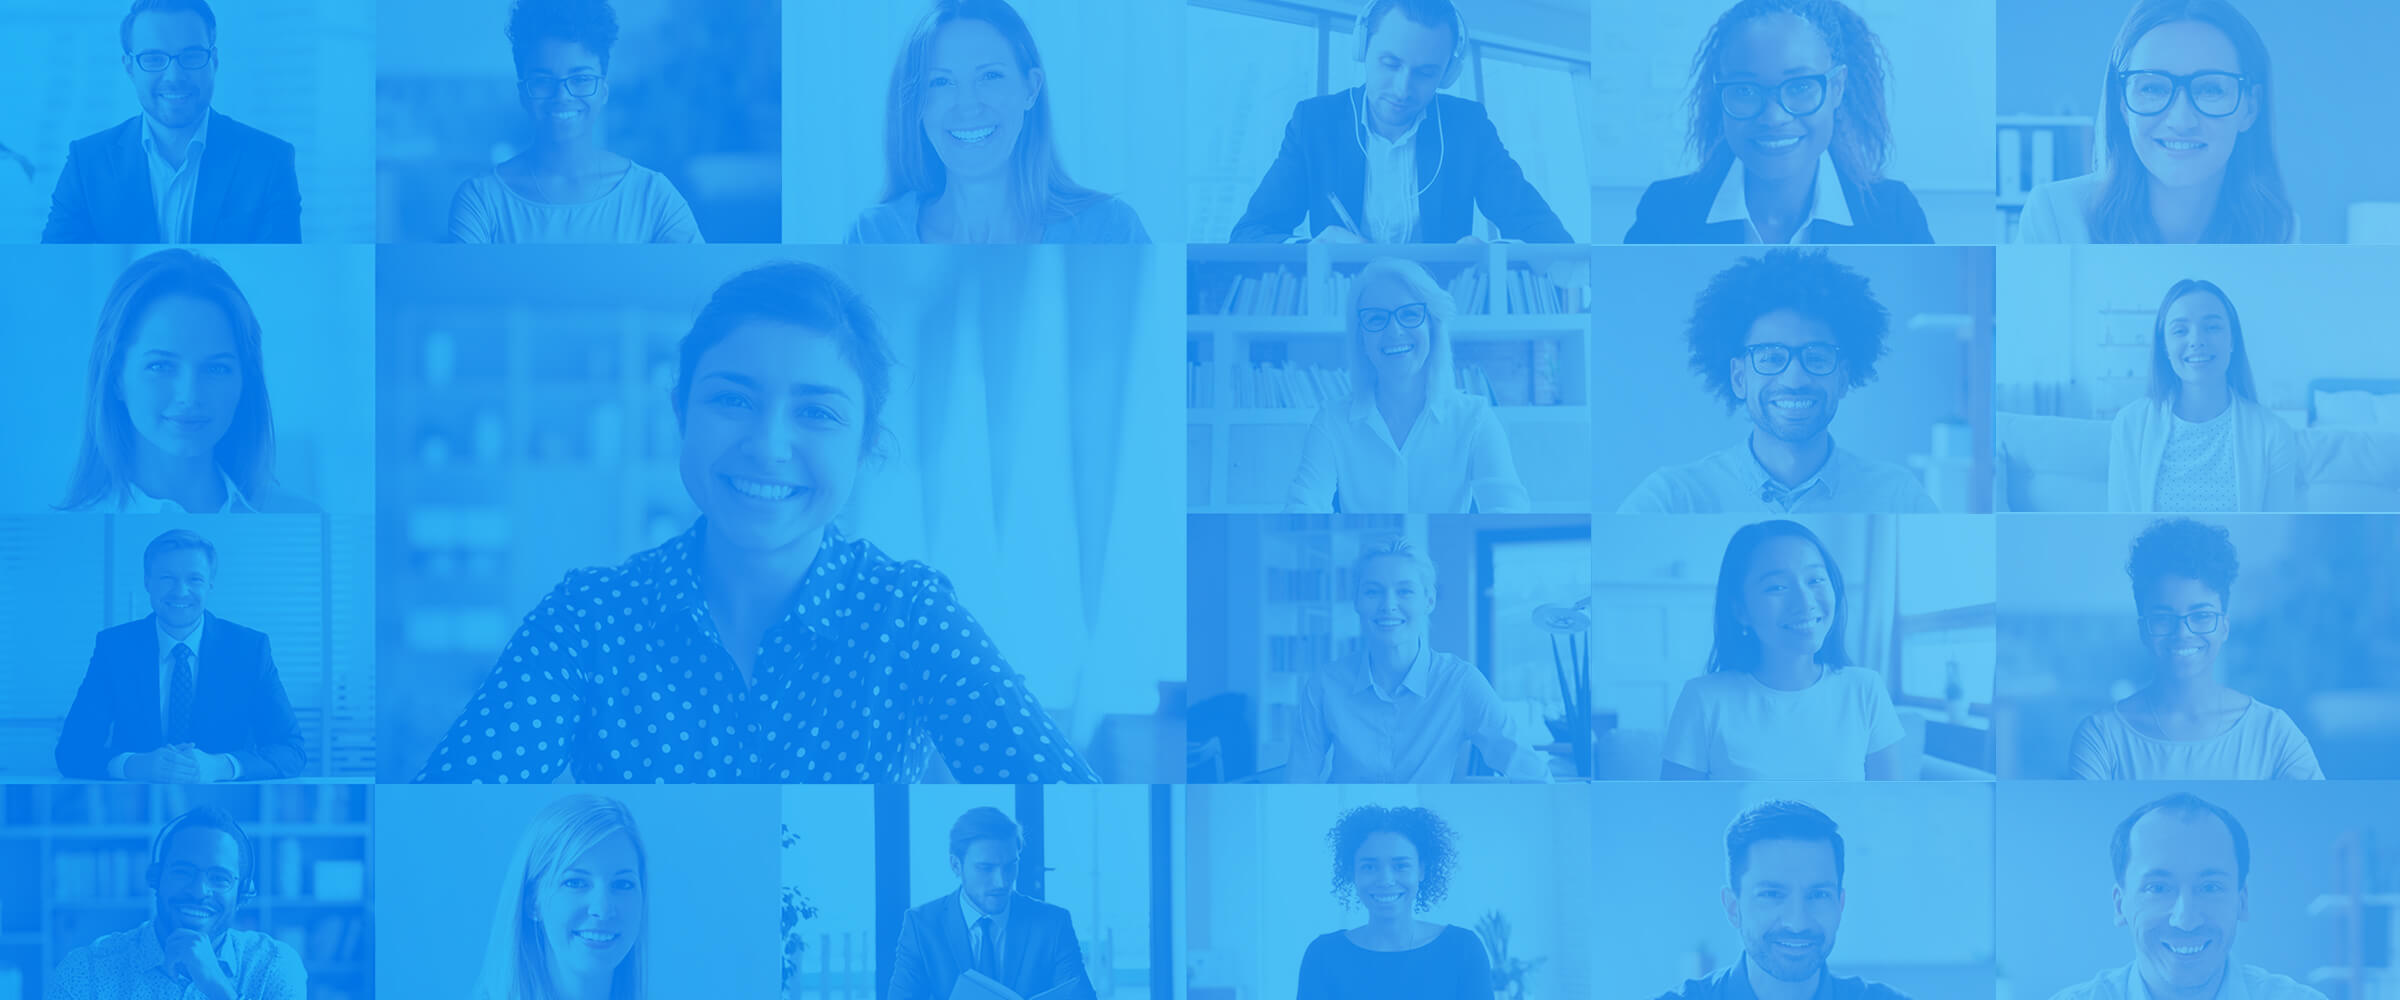 [Translate to French:] Grid showing stock photos of office employees in individual squares, and total blue overlay